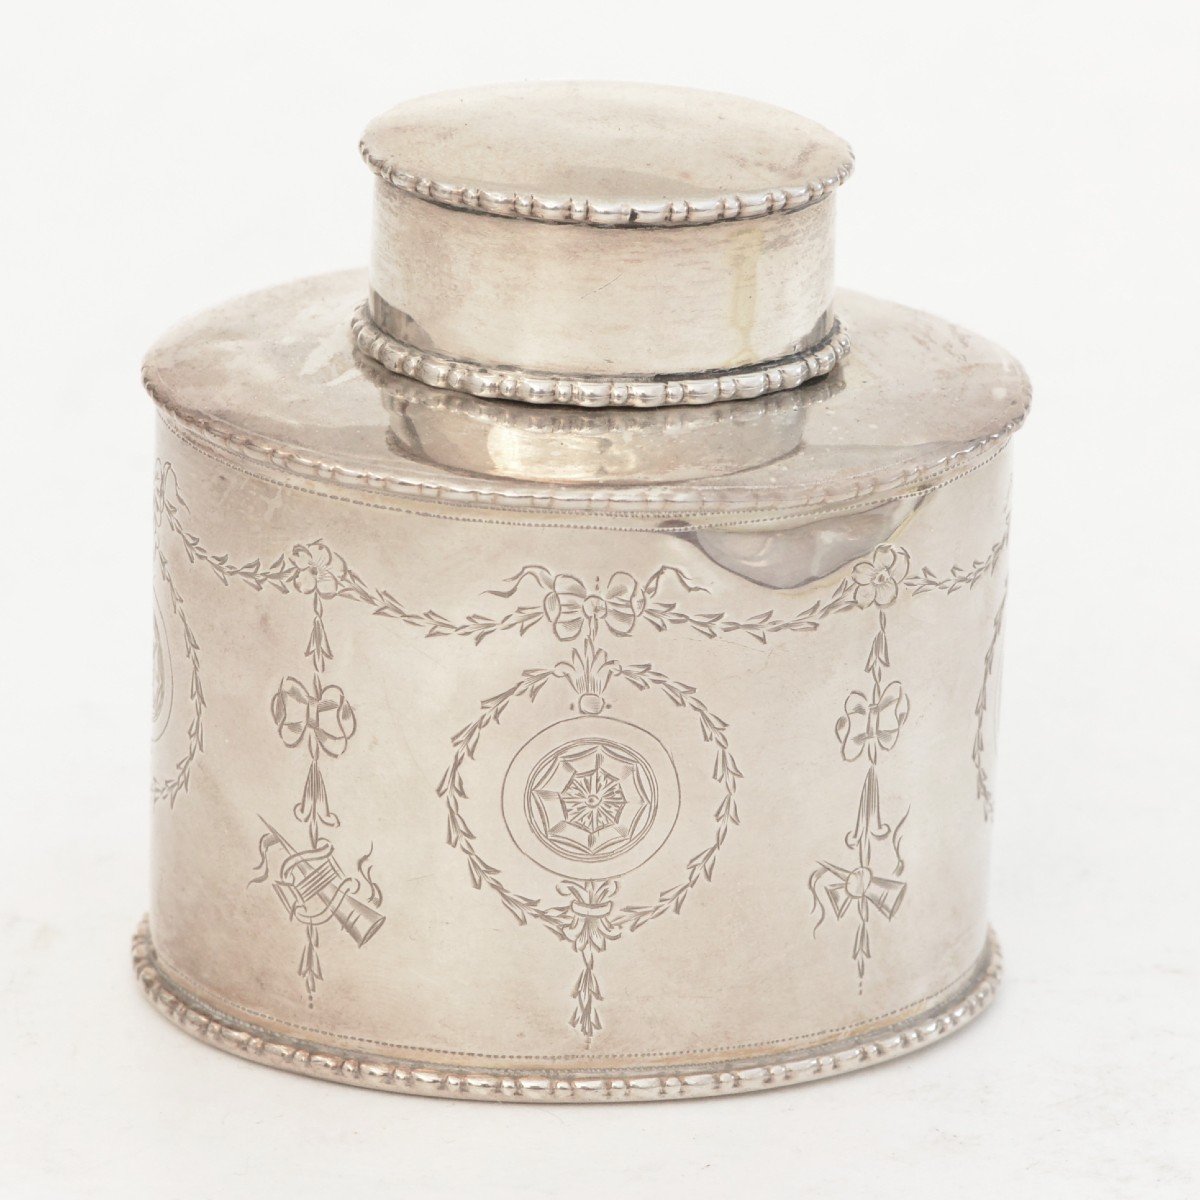 Miniature English Sterling Silver Tea Caddy By George Nathan And Ridley Hayes Chester 1909